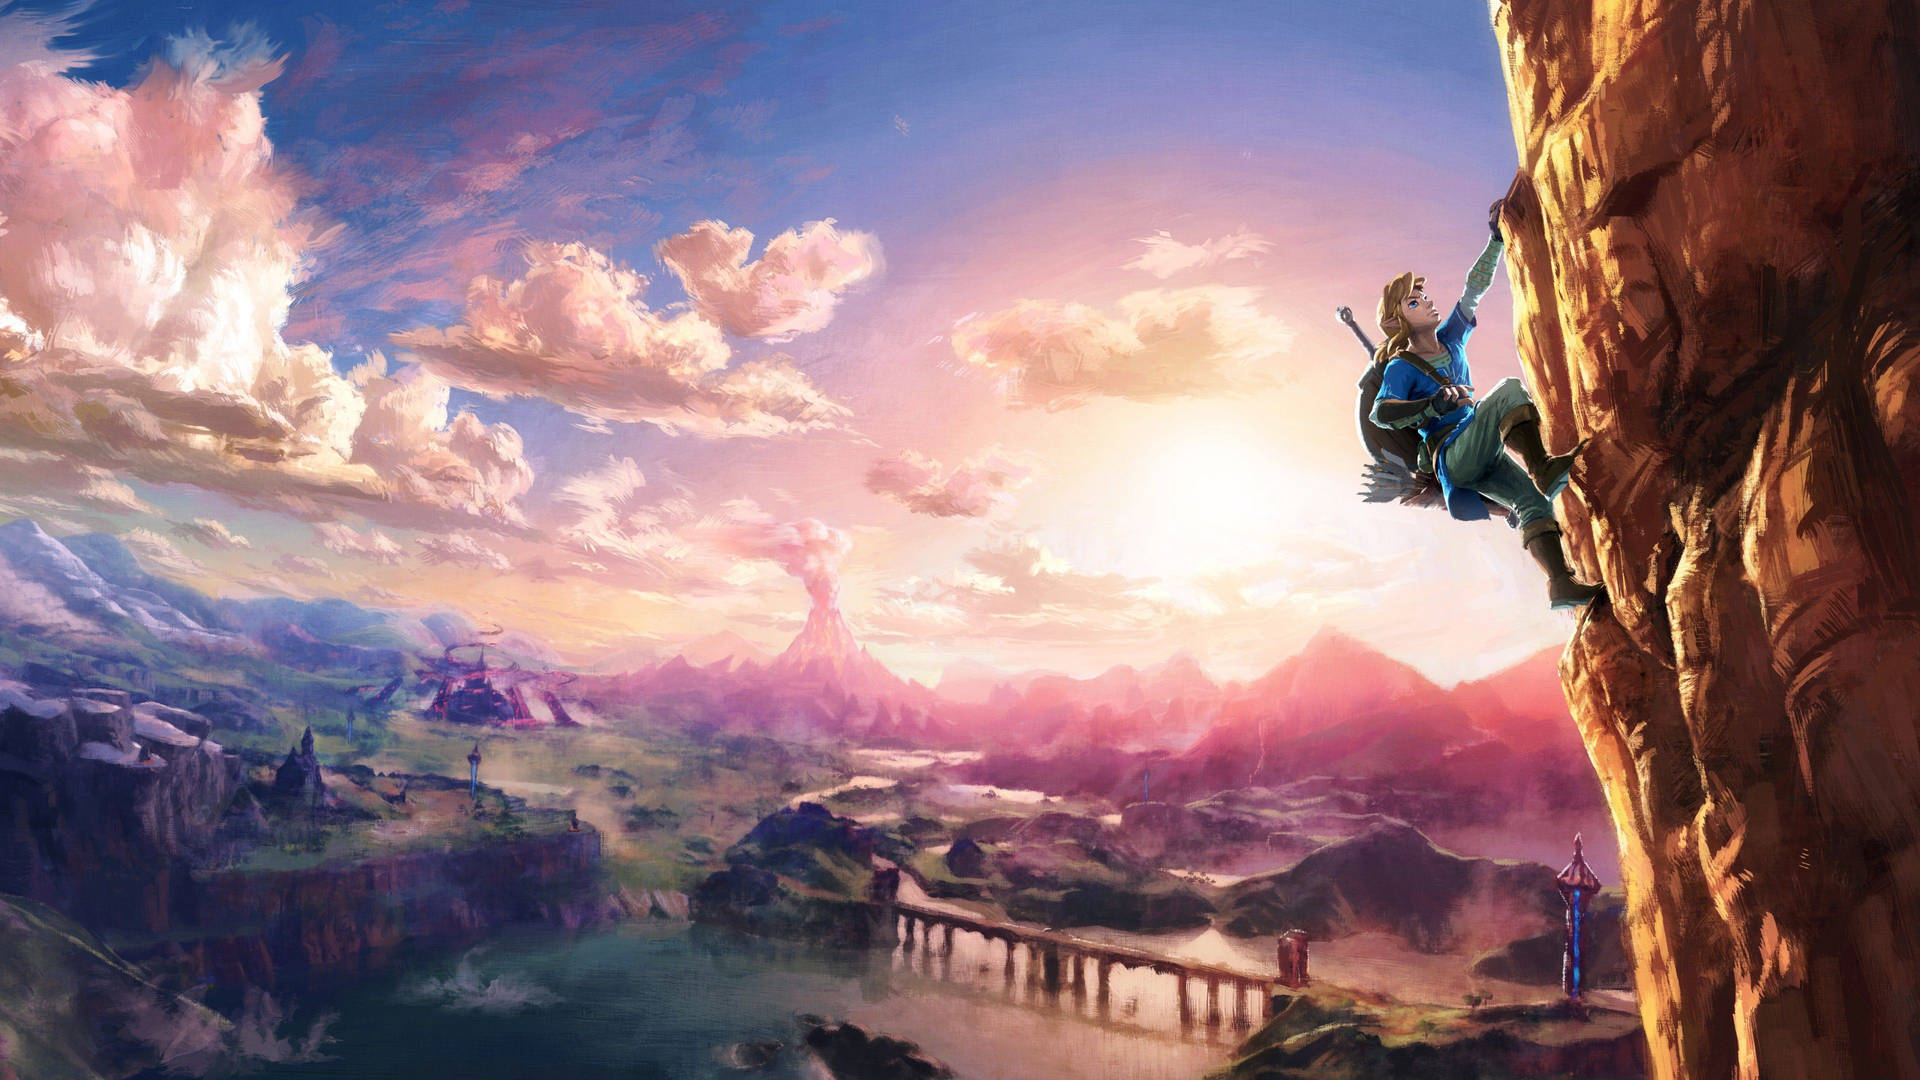 Top 999+ Legend Of Zelda Breath Of The Wild Wallpaper Full HD, 4K✅Free to Use